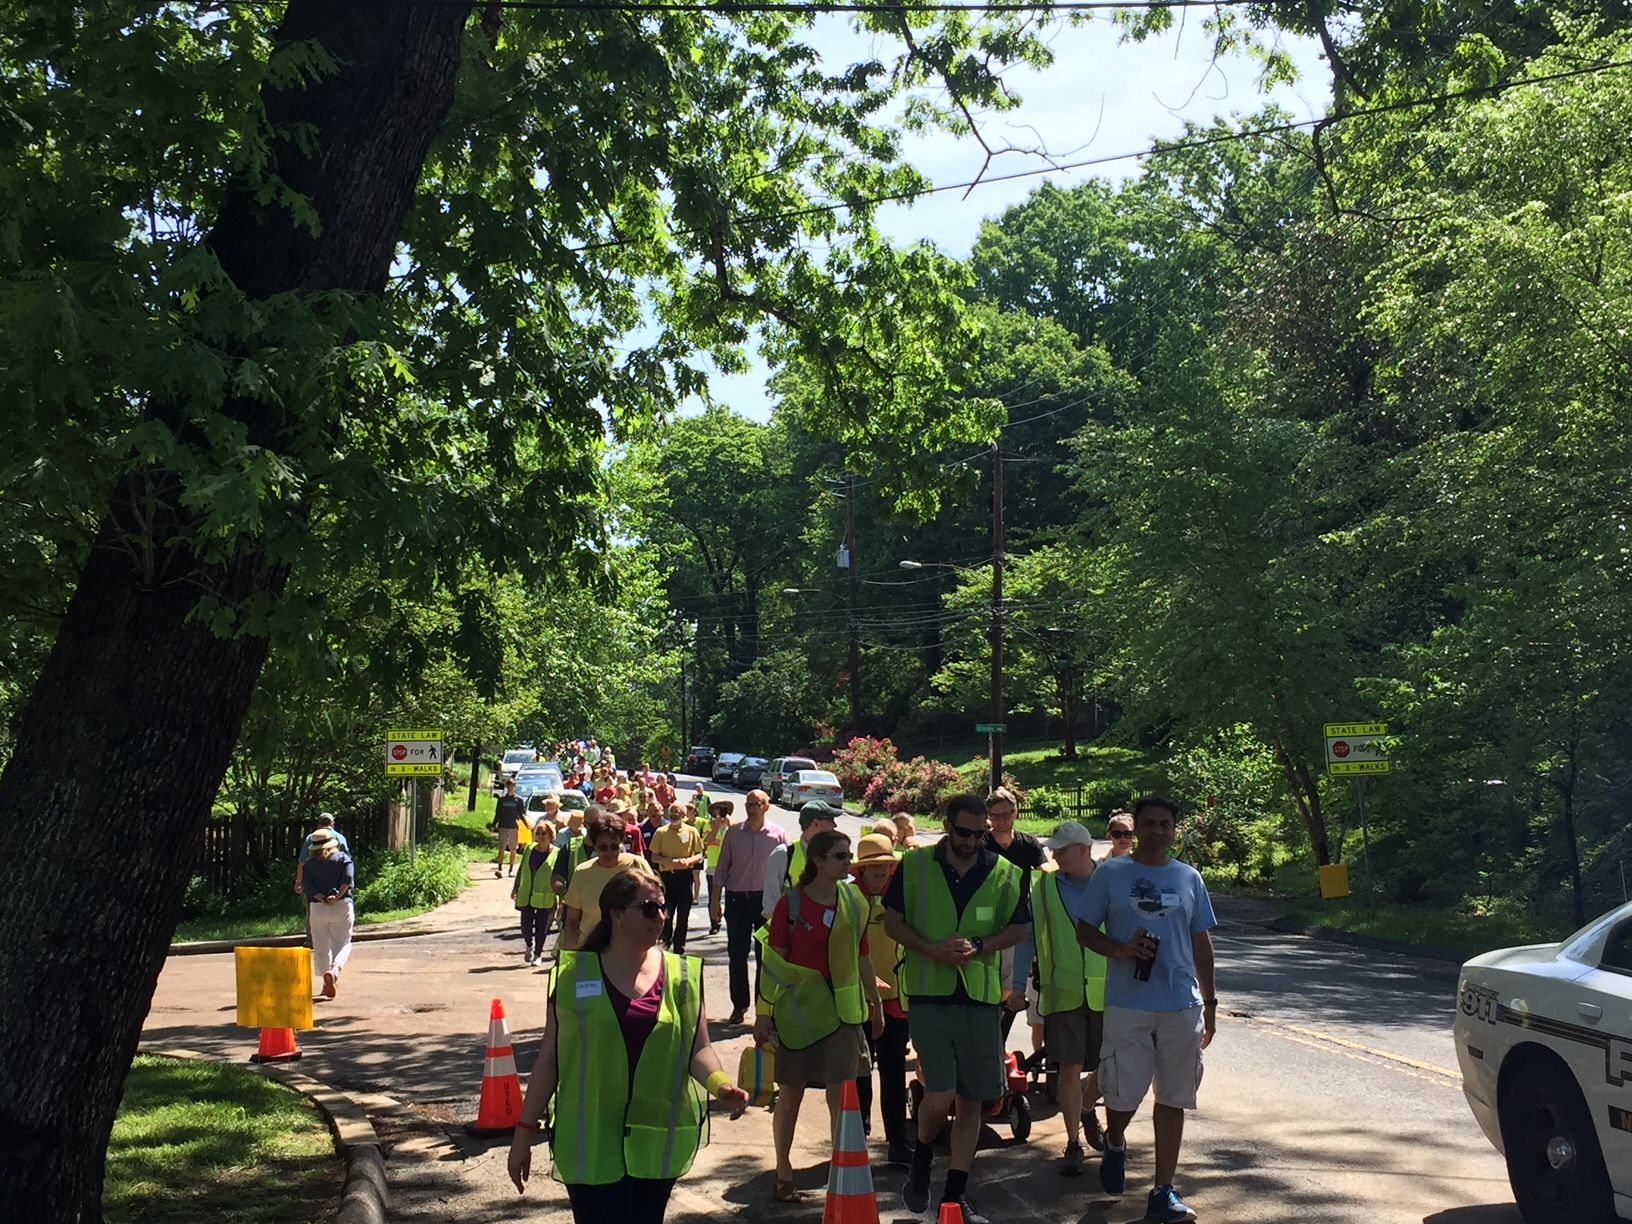 “As you can see we don’t have any traffic calming, we don’t have any sidewalks, no bike lane, and there were 11 crashes on this one mile section of road last year,” says Corinne Hart, who helped organize a safety walk attended by around 100 residents and politicians Sunday. (WTOP/John Domen) 